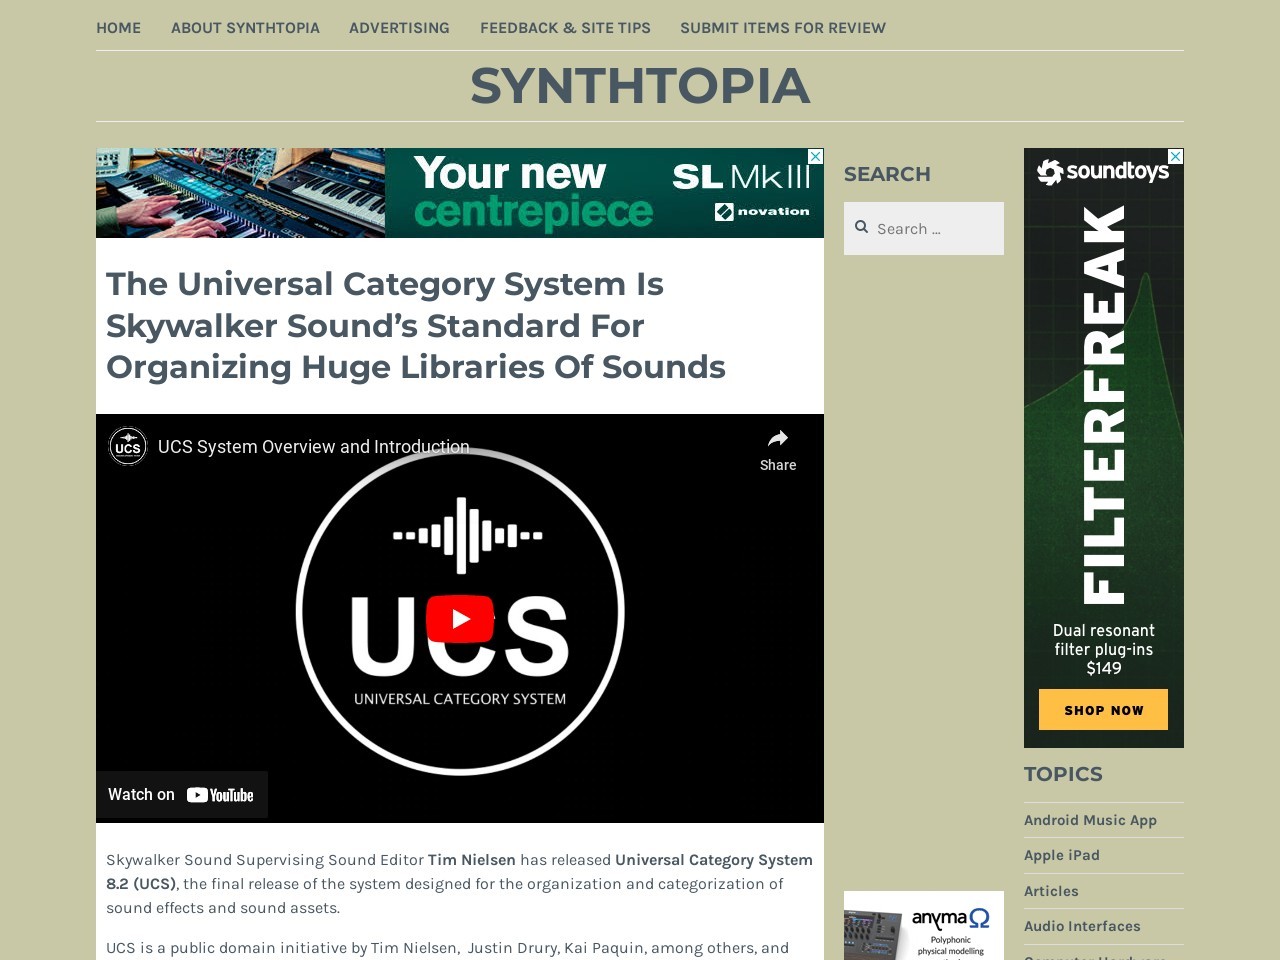 The Universal Category System Is Skywalker Sound’s Standard For Organizing Huge Libraries Of Sounds – Synthtopia